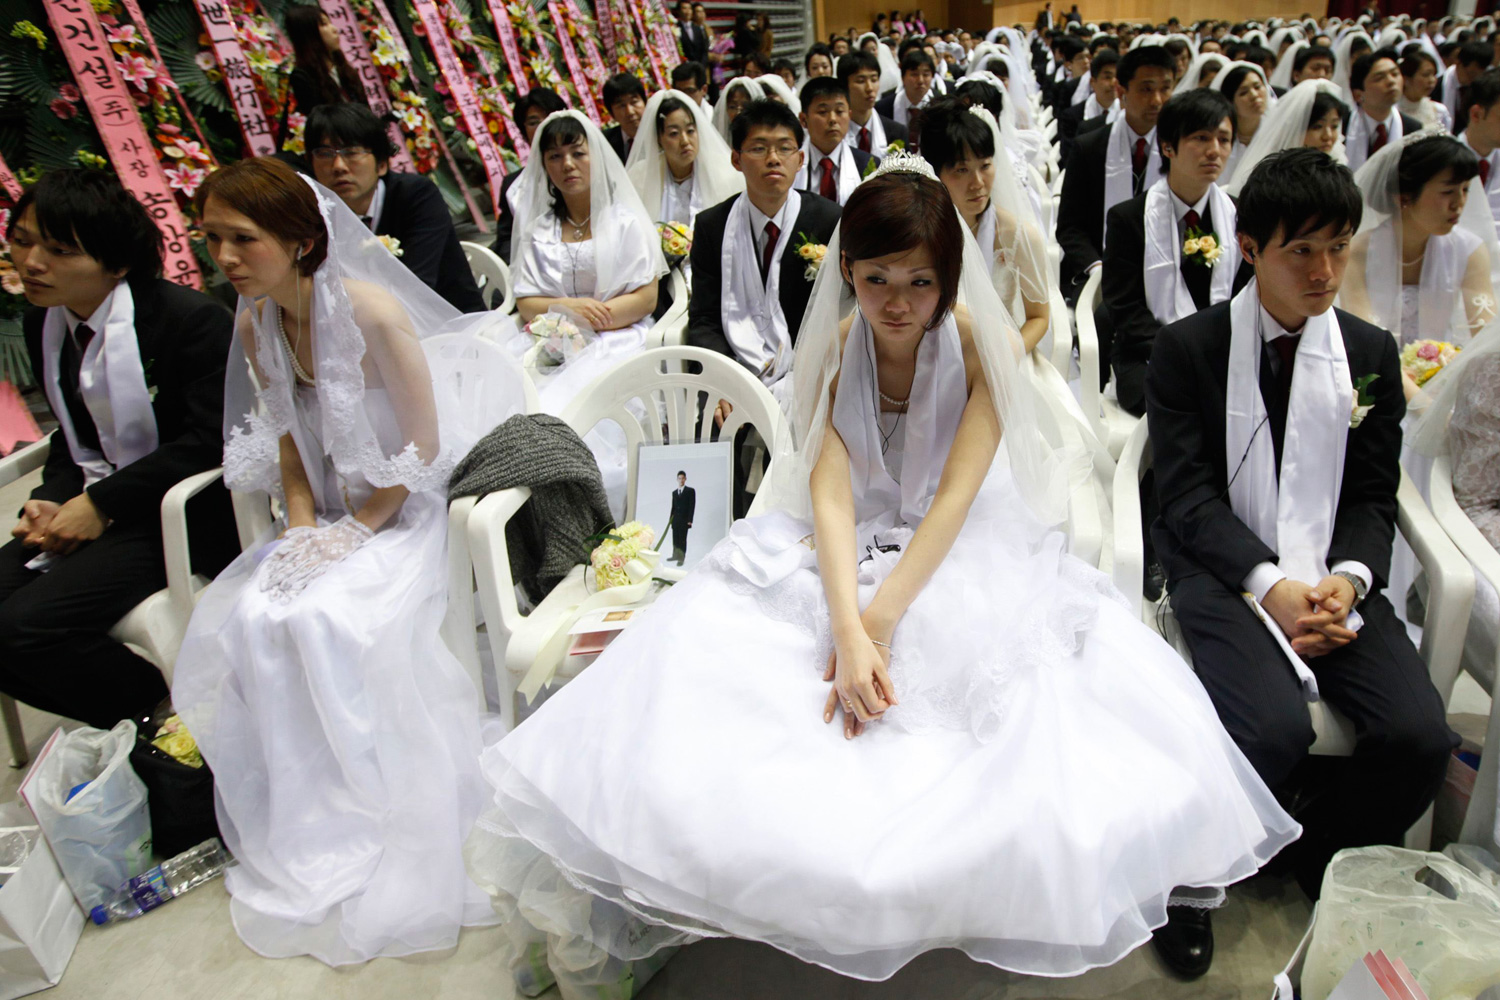 March 24, 2012. A bride, center, attends a mass wedding ceremony of the Unification Church as a portrait of her bridegroom, who could not attend the ceremony, is seen next to her on a chair in Gapyeong, about 60 km (37 miles) northeast of Seoul.